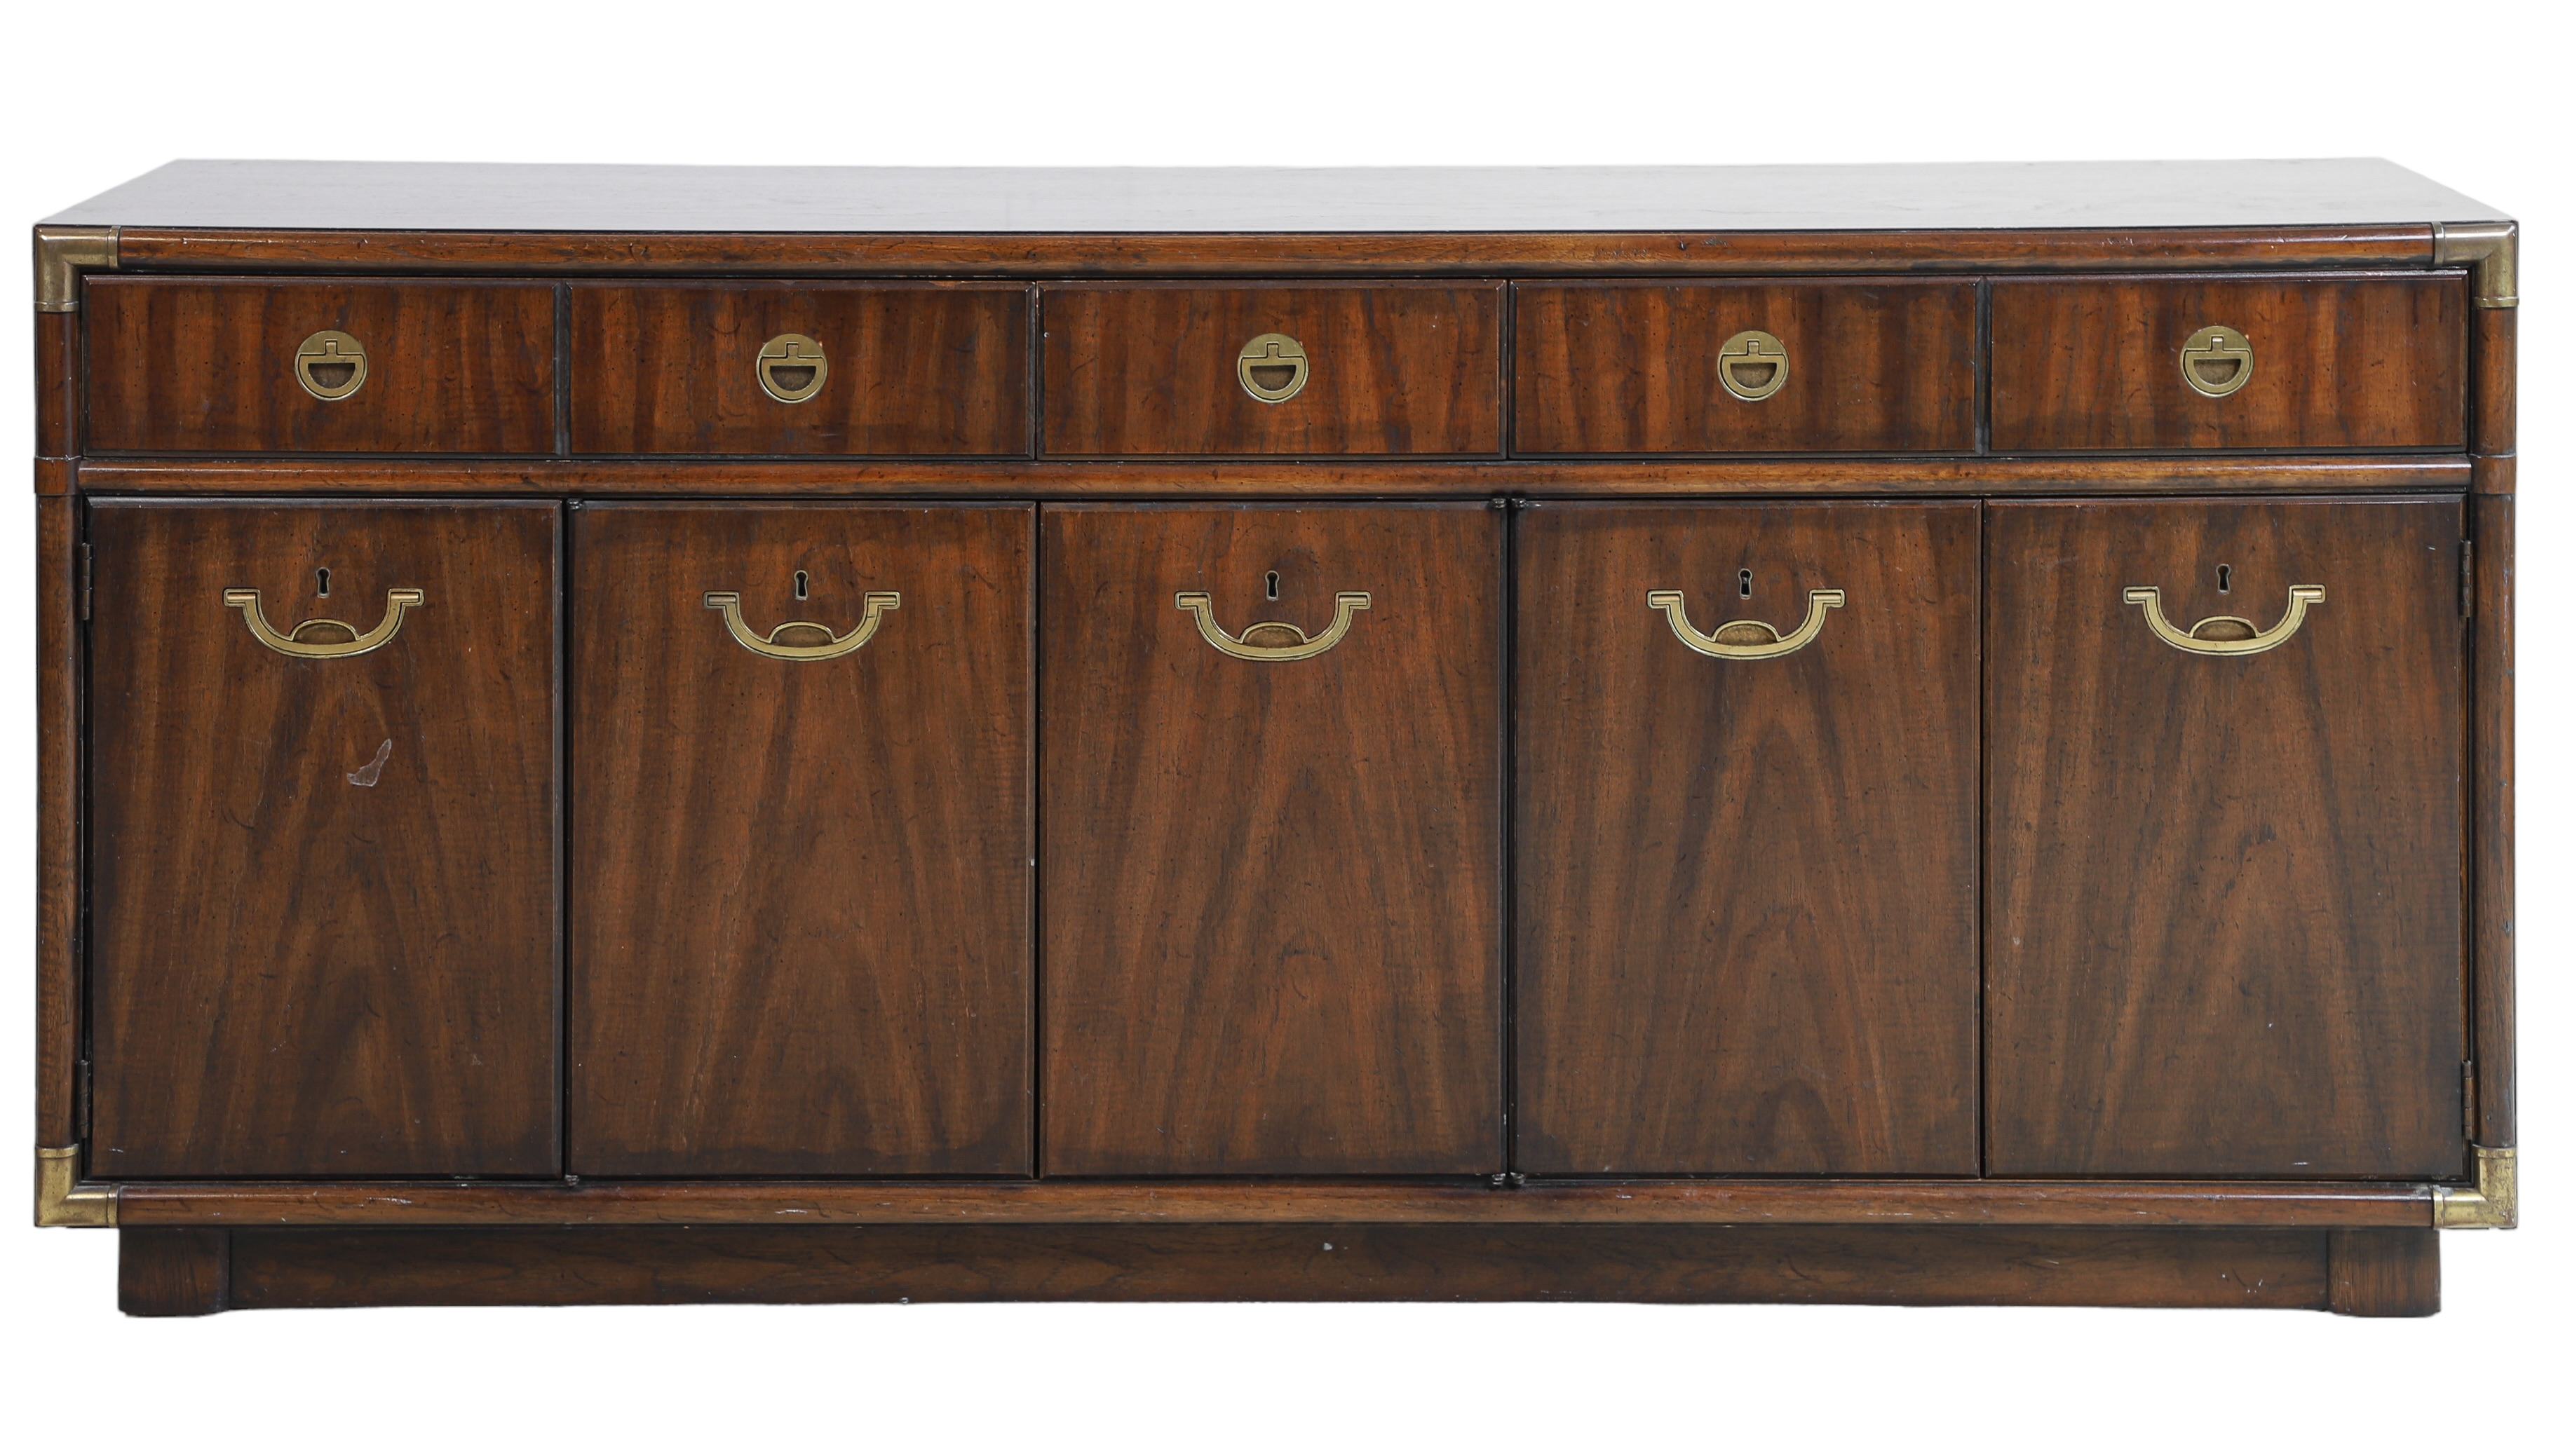 Drexel by Accolade campaign style chest